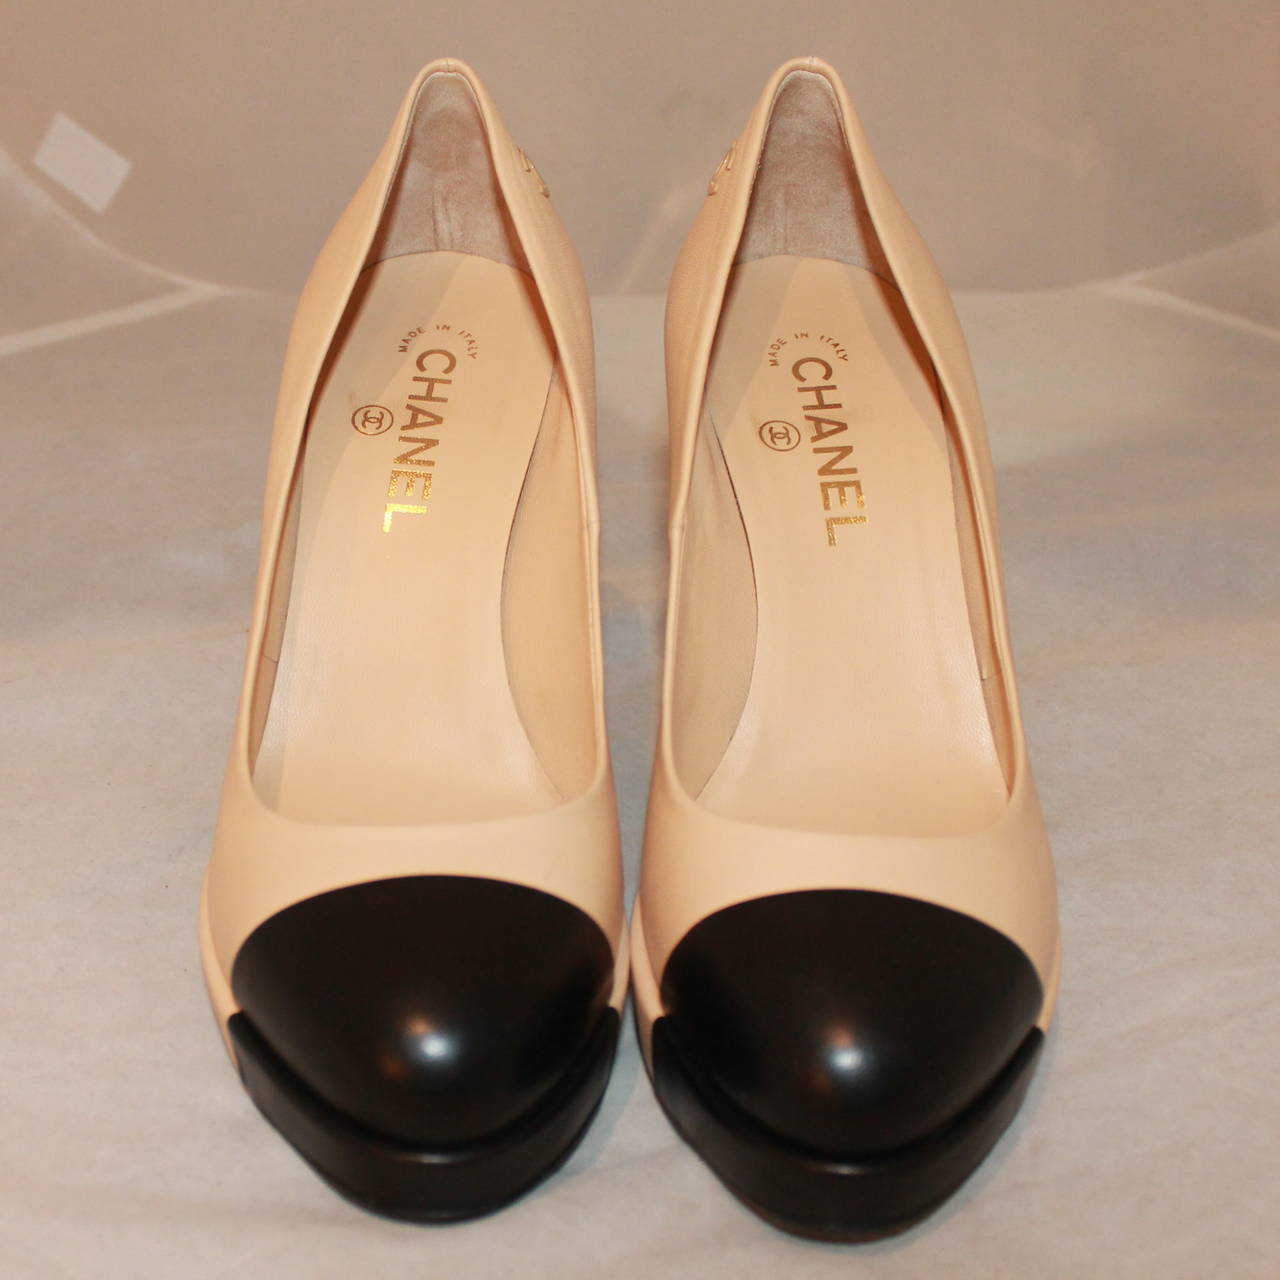 Chanel Black & Tan Shoes with Platform - 39.5. These shoes are in excellent condition with little to no wear on the bottom. They have no marks on the leather.